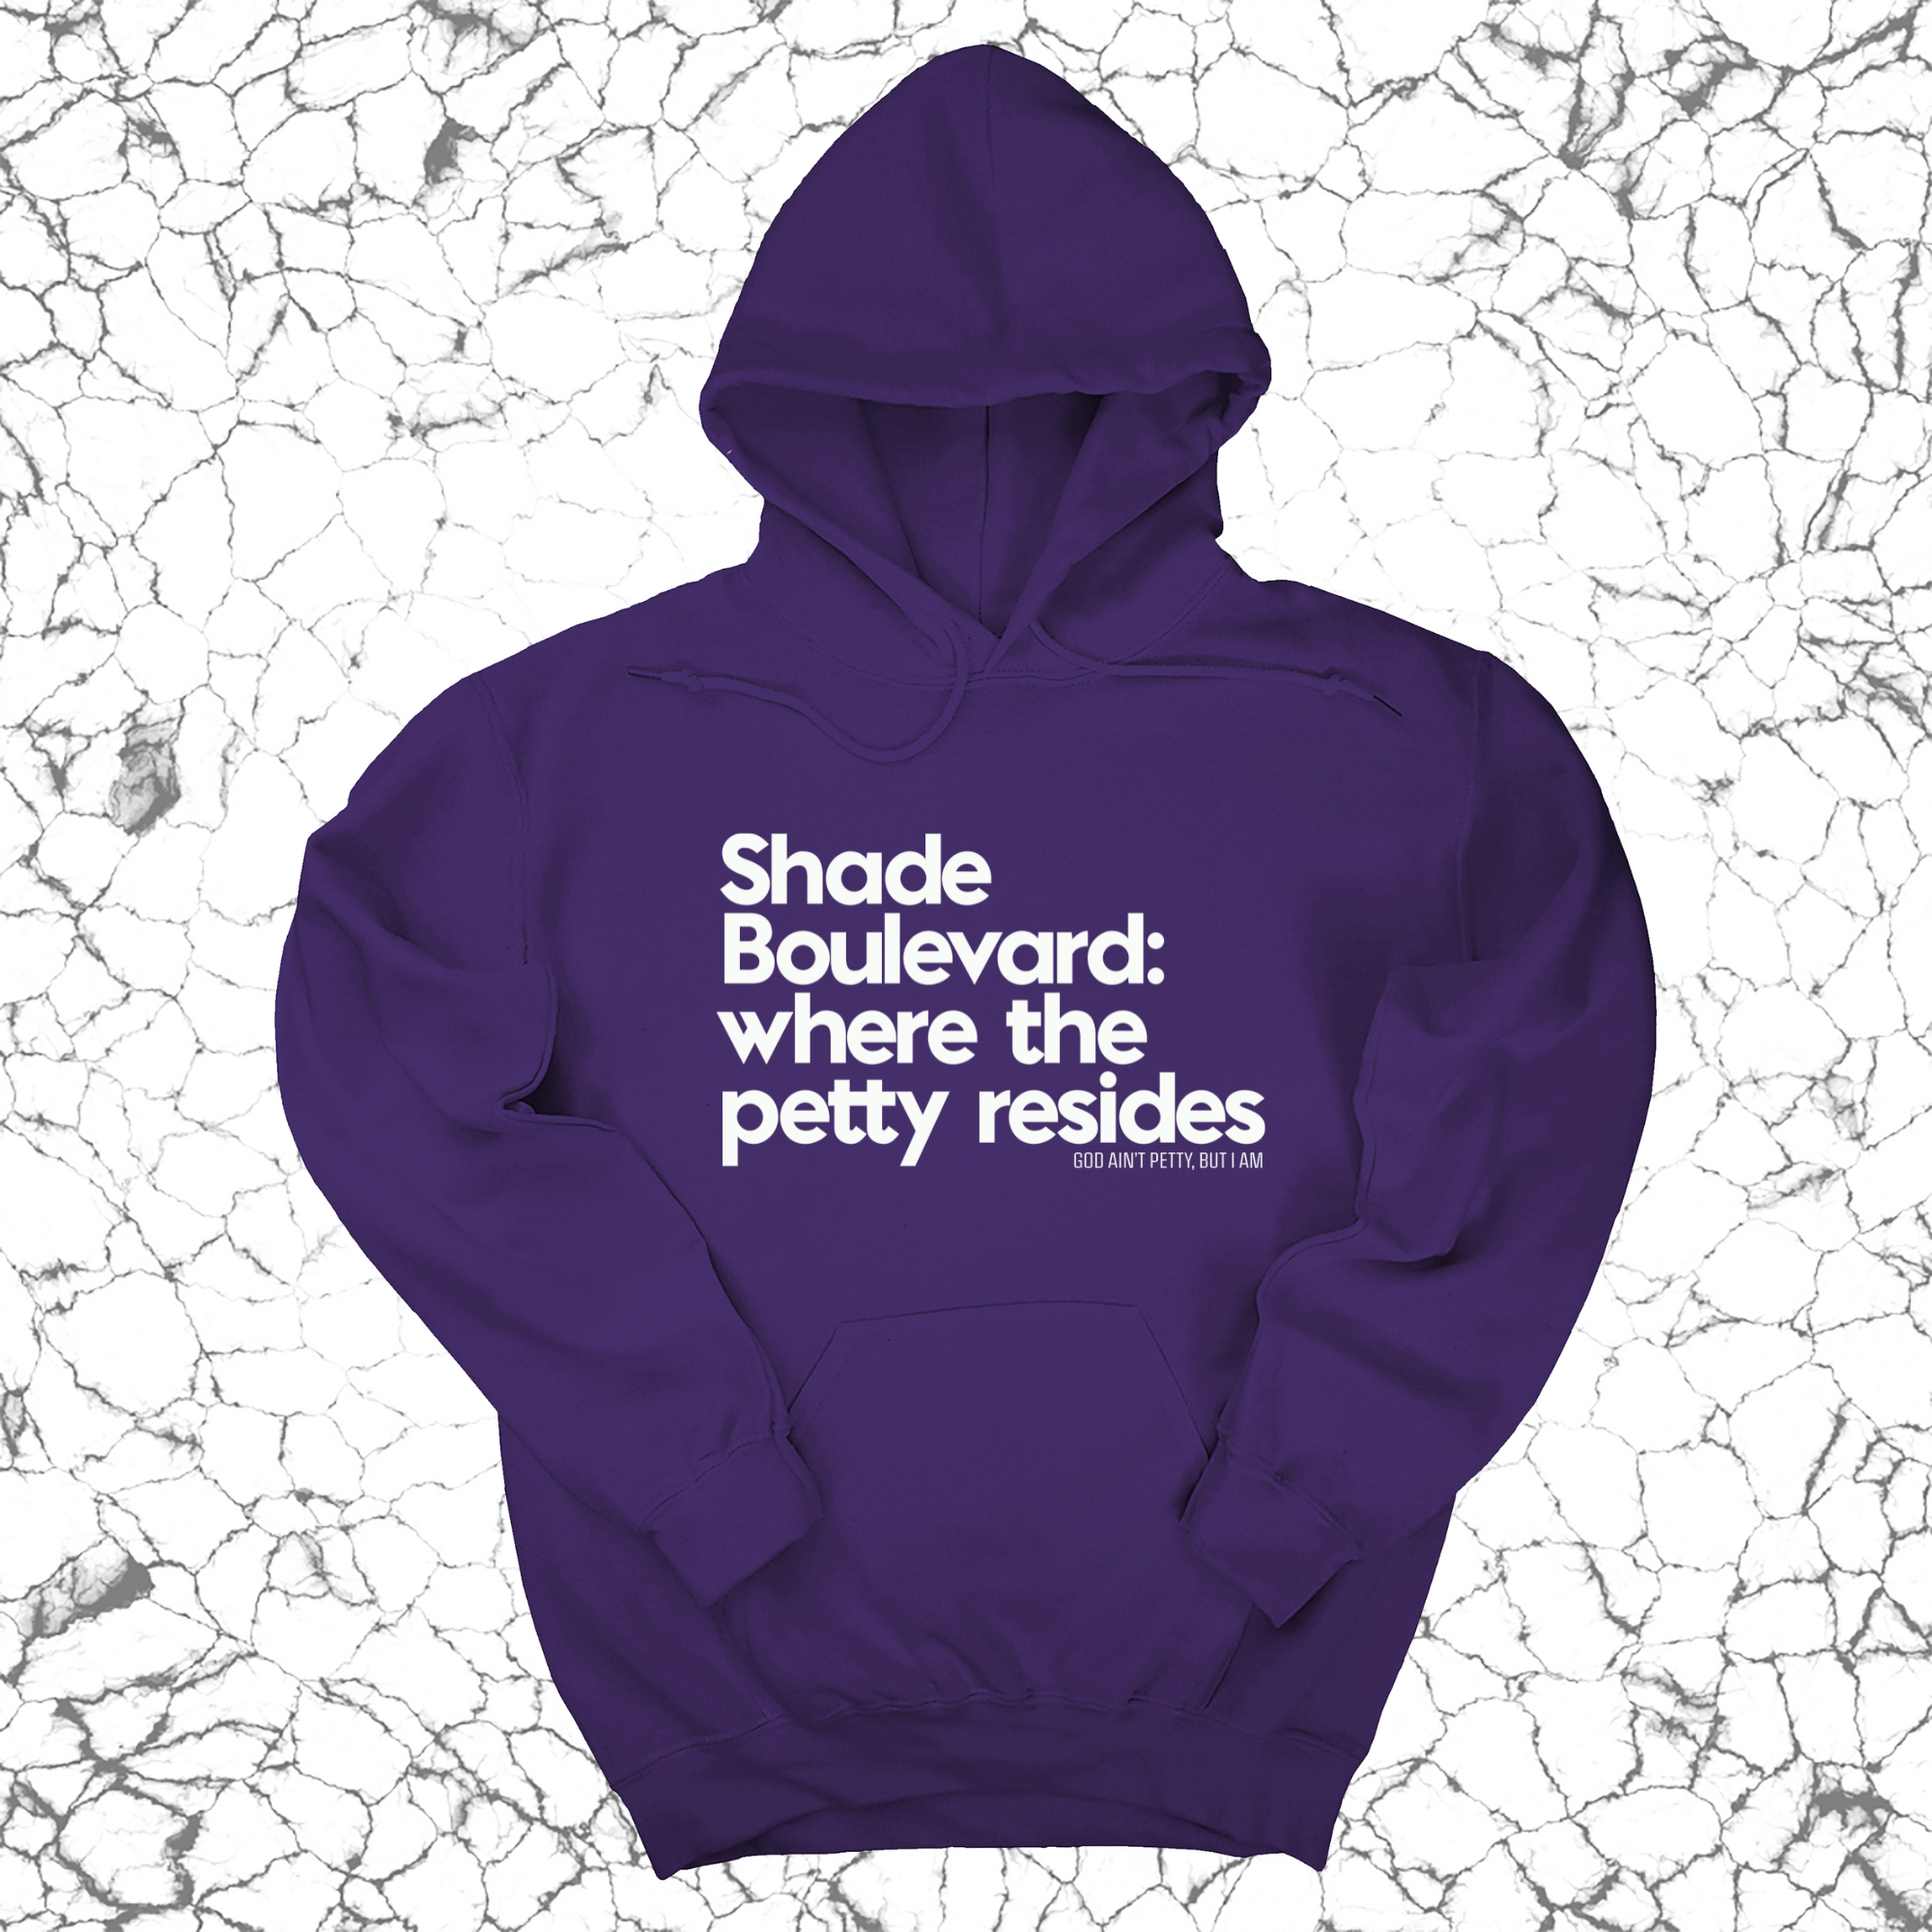 Shade boulevard where the petty resides Unisex Hoodie-Hoodie-The Original God Ain't Petty But I Am